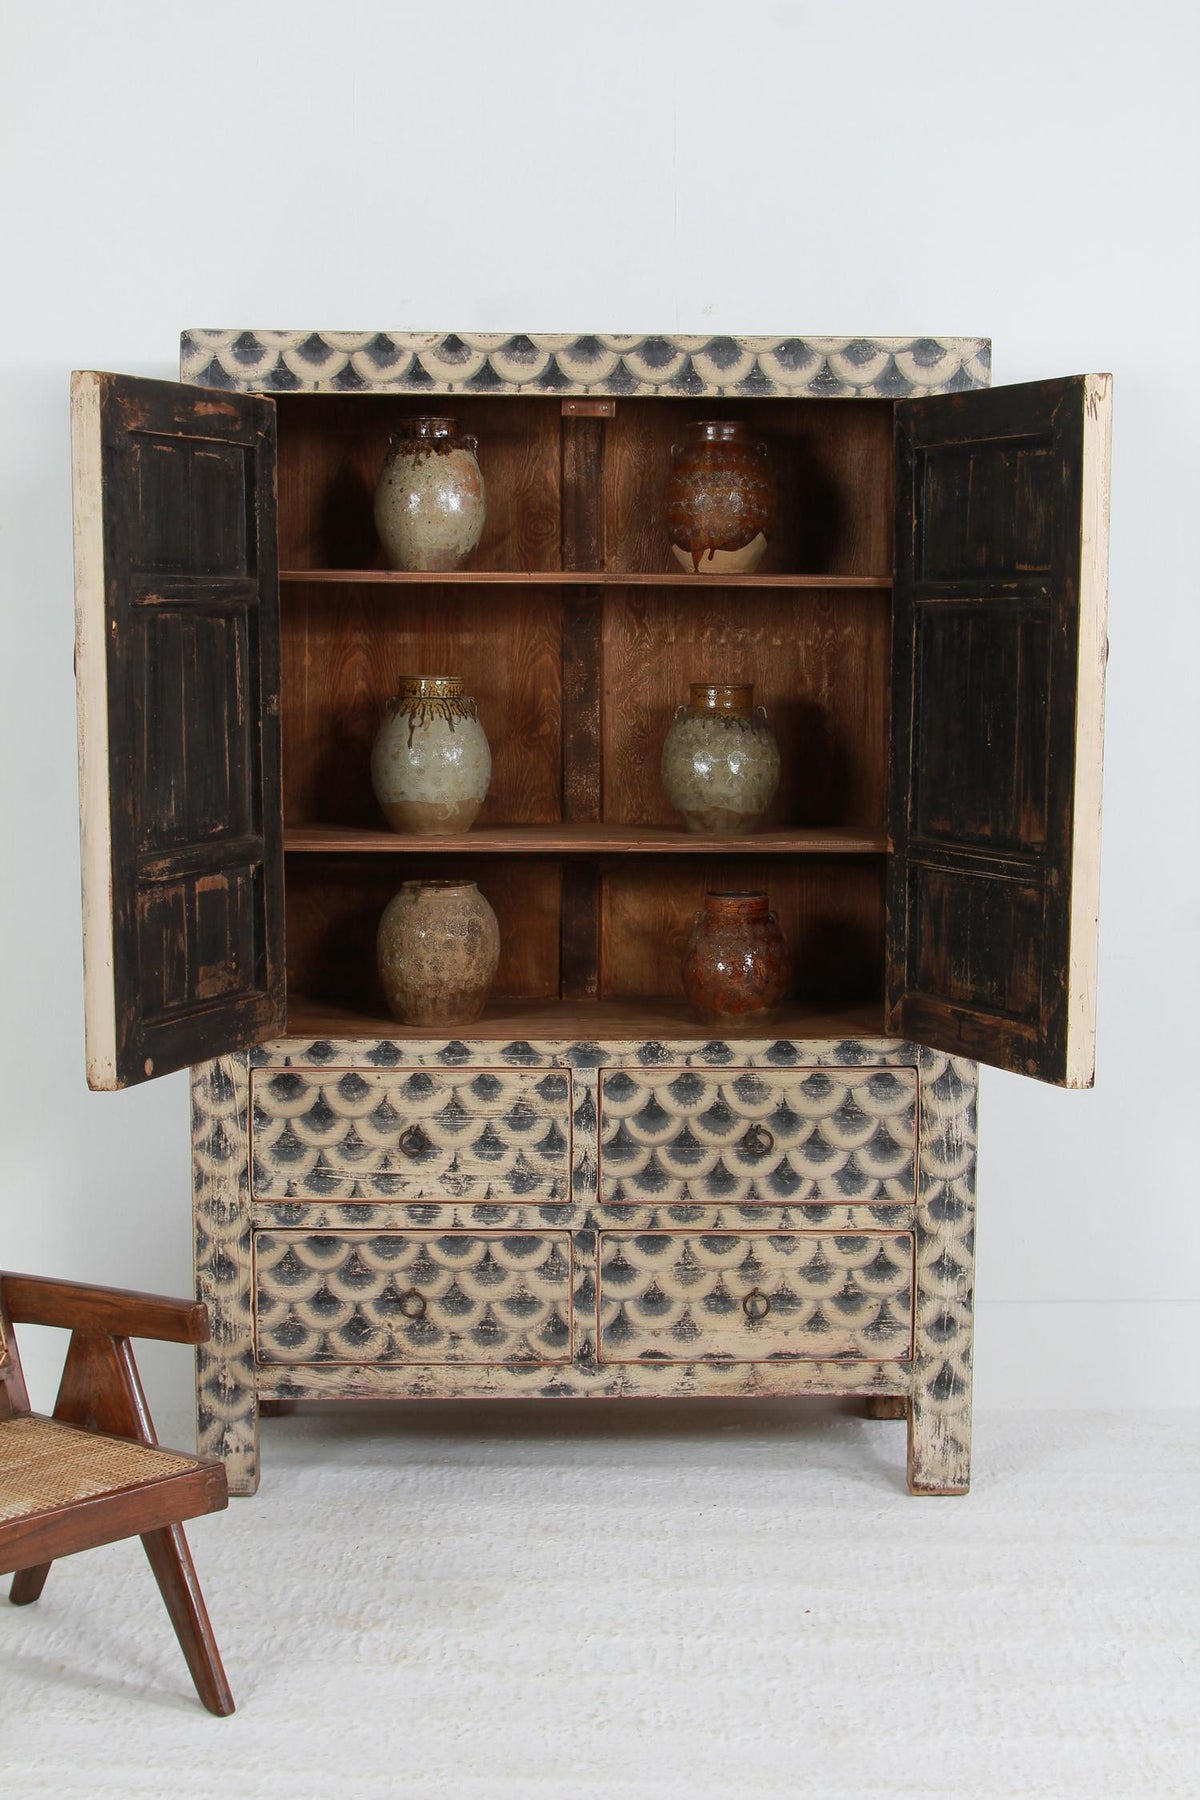 UNIQUE CONTINENTAL Cabinet  WITH FABULOUS HAND PAINTED PATINA